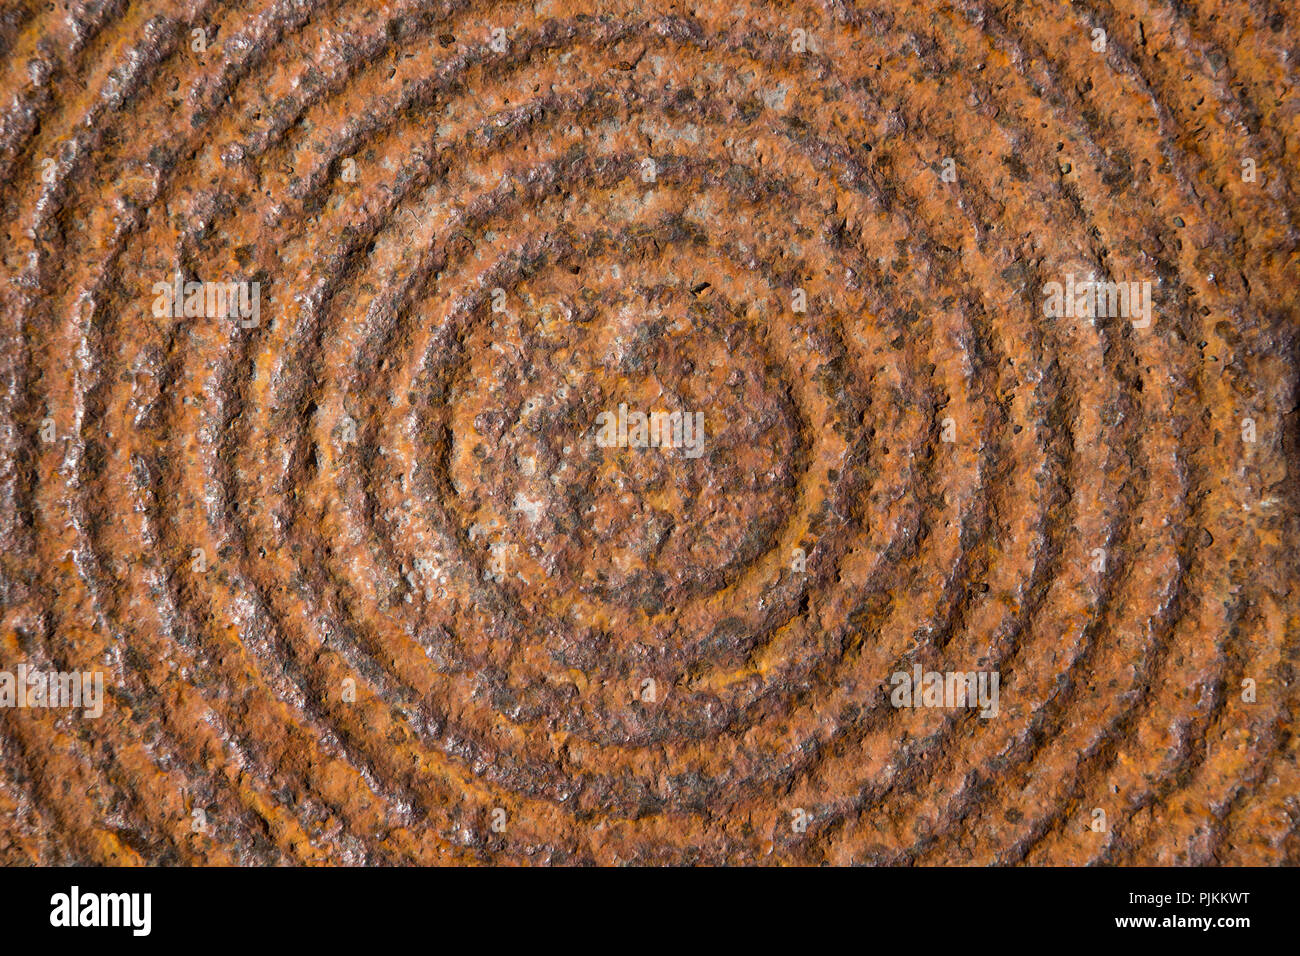 Iron plate, concentric circles, rusty Stock Photo